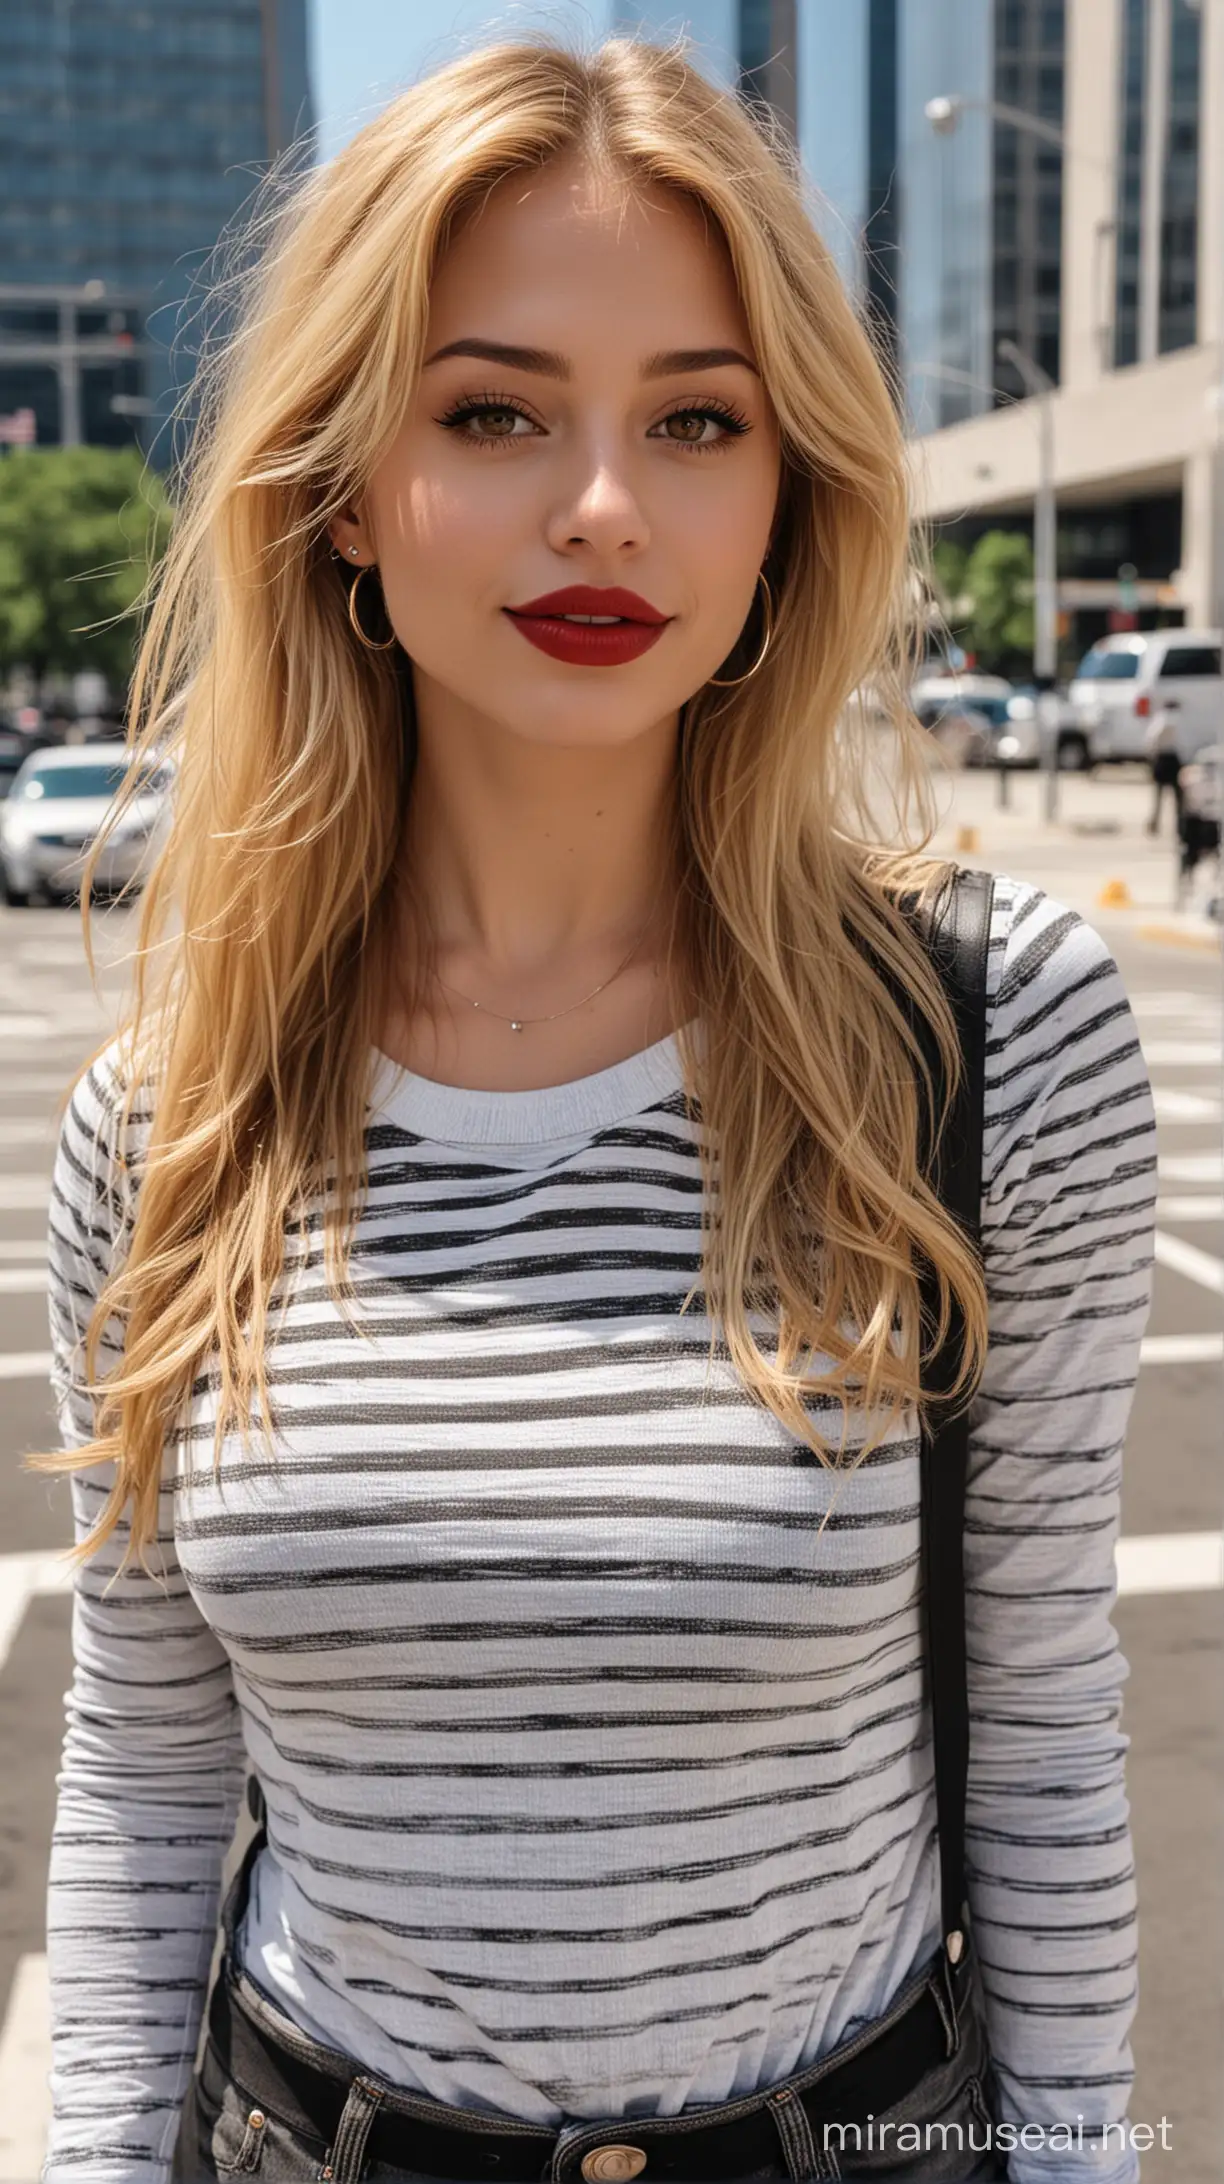 Beautiful USA Girl with Golden Hair and Red Lipstick in Urban Setting